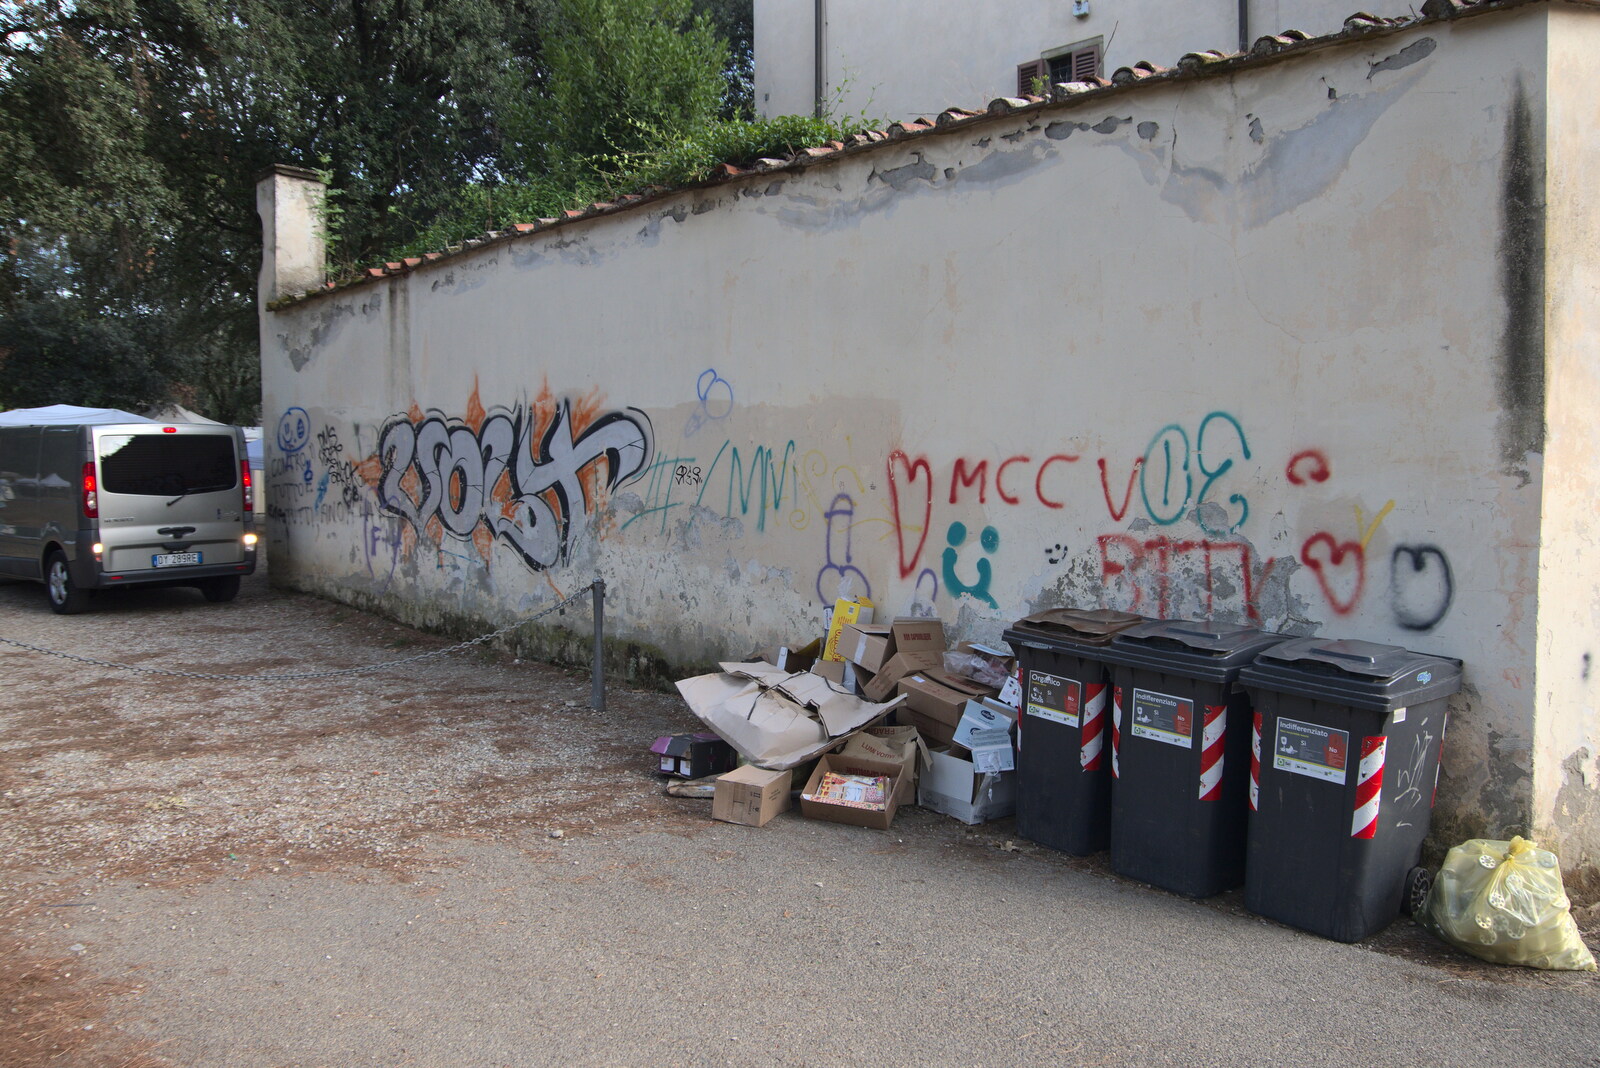 A Day by the Pool and a Festival Rehearsal, Arezzo, Italy - 3rd September 2022: Graffiti and bins near the cathedral